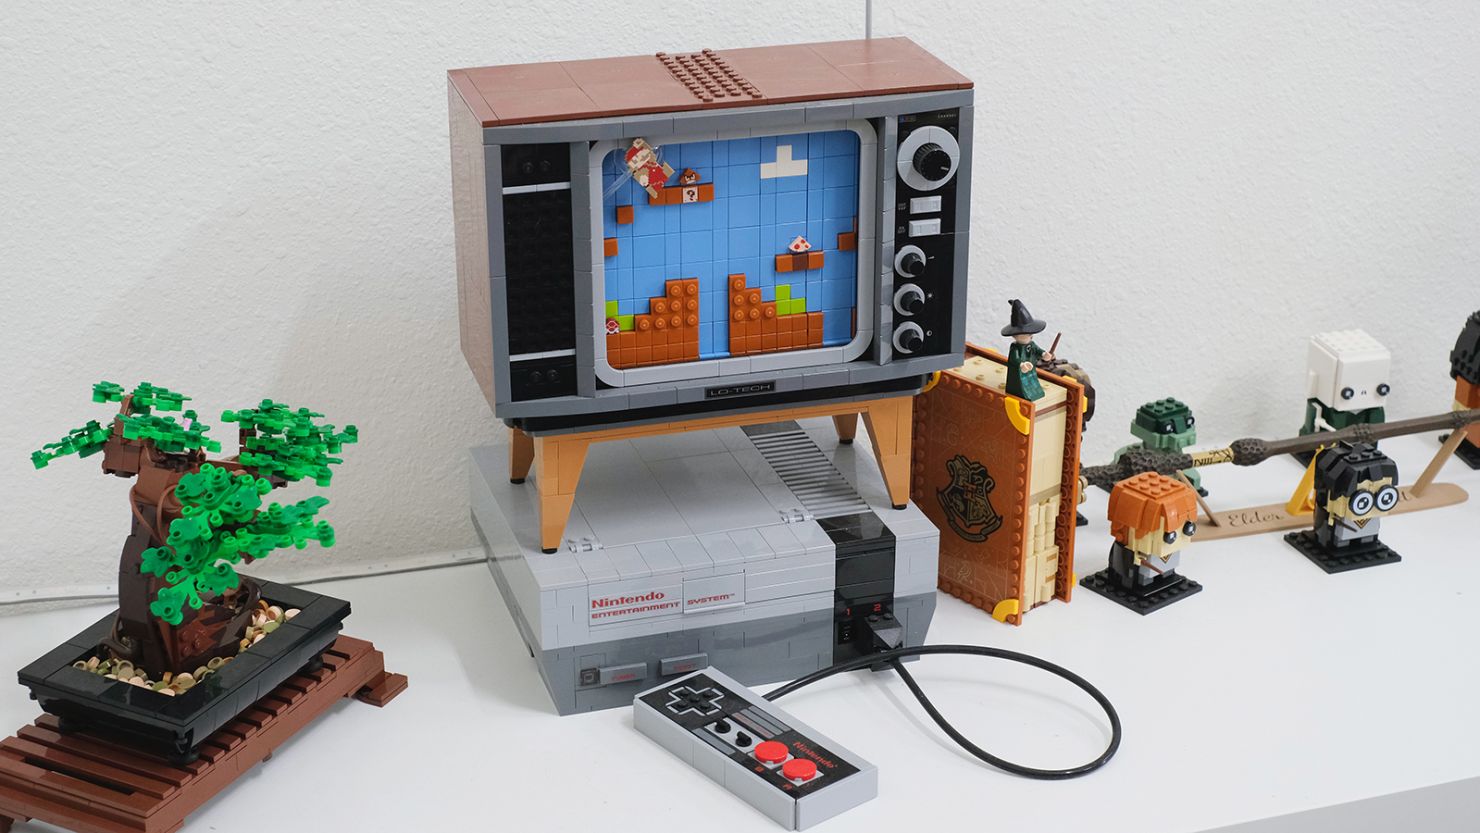 We Build the LEGO: Nintendo Entertainment System and it Contains a